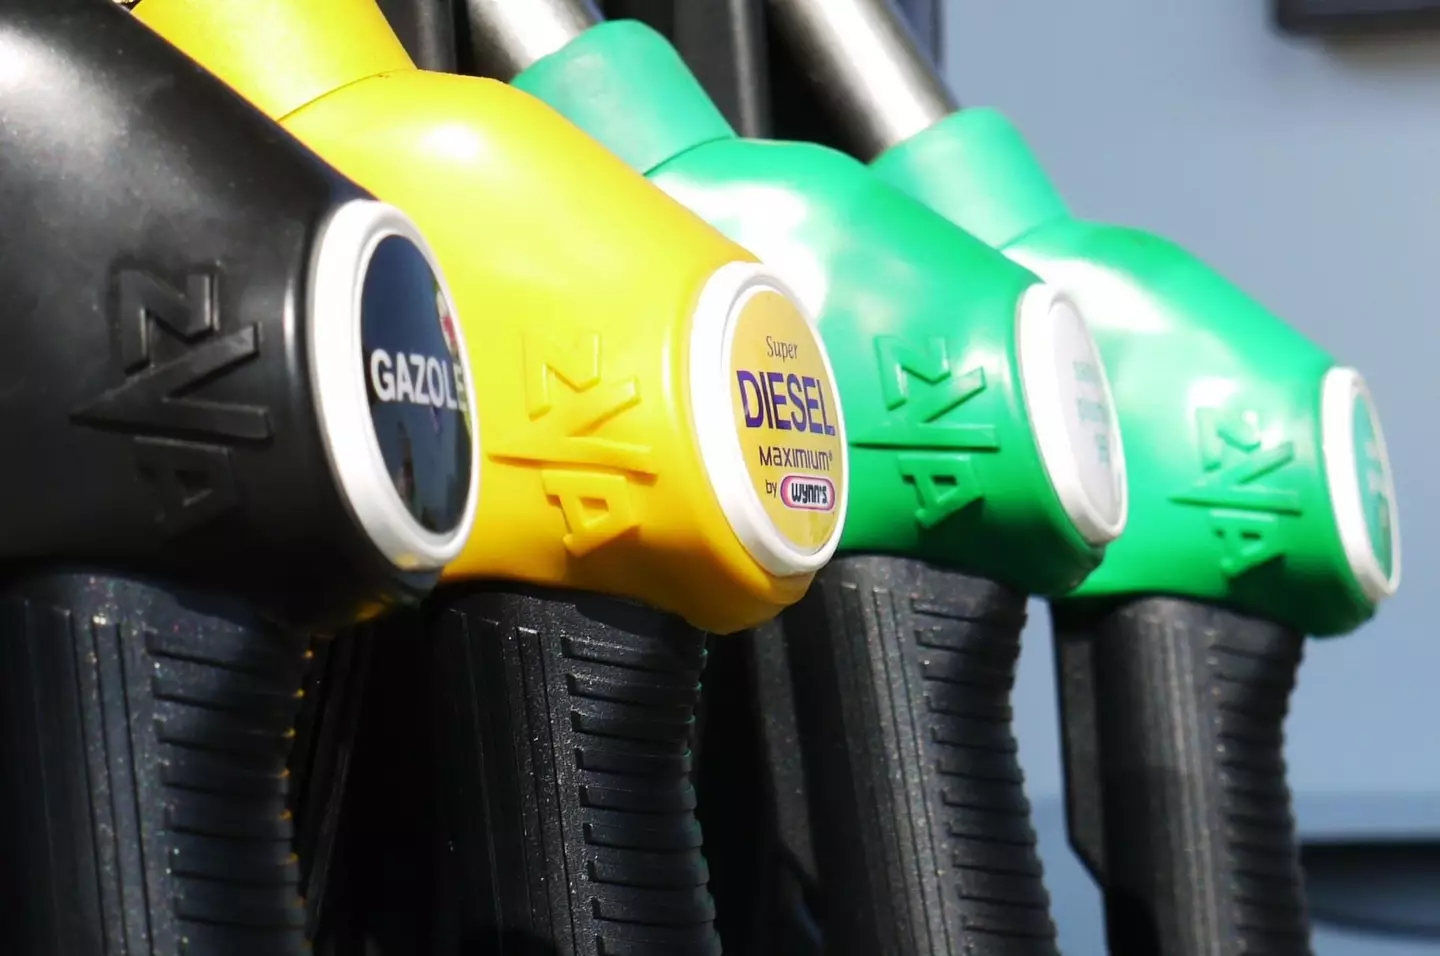 Experts have warned that petrol prices will hit £2 a litre.